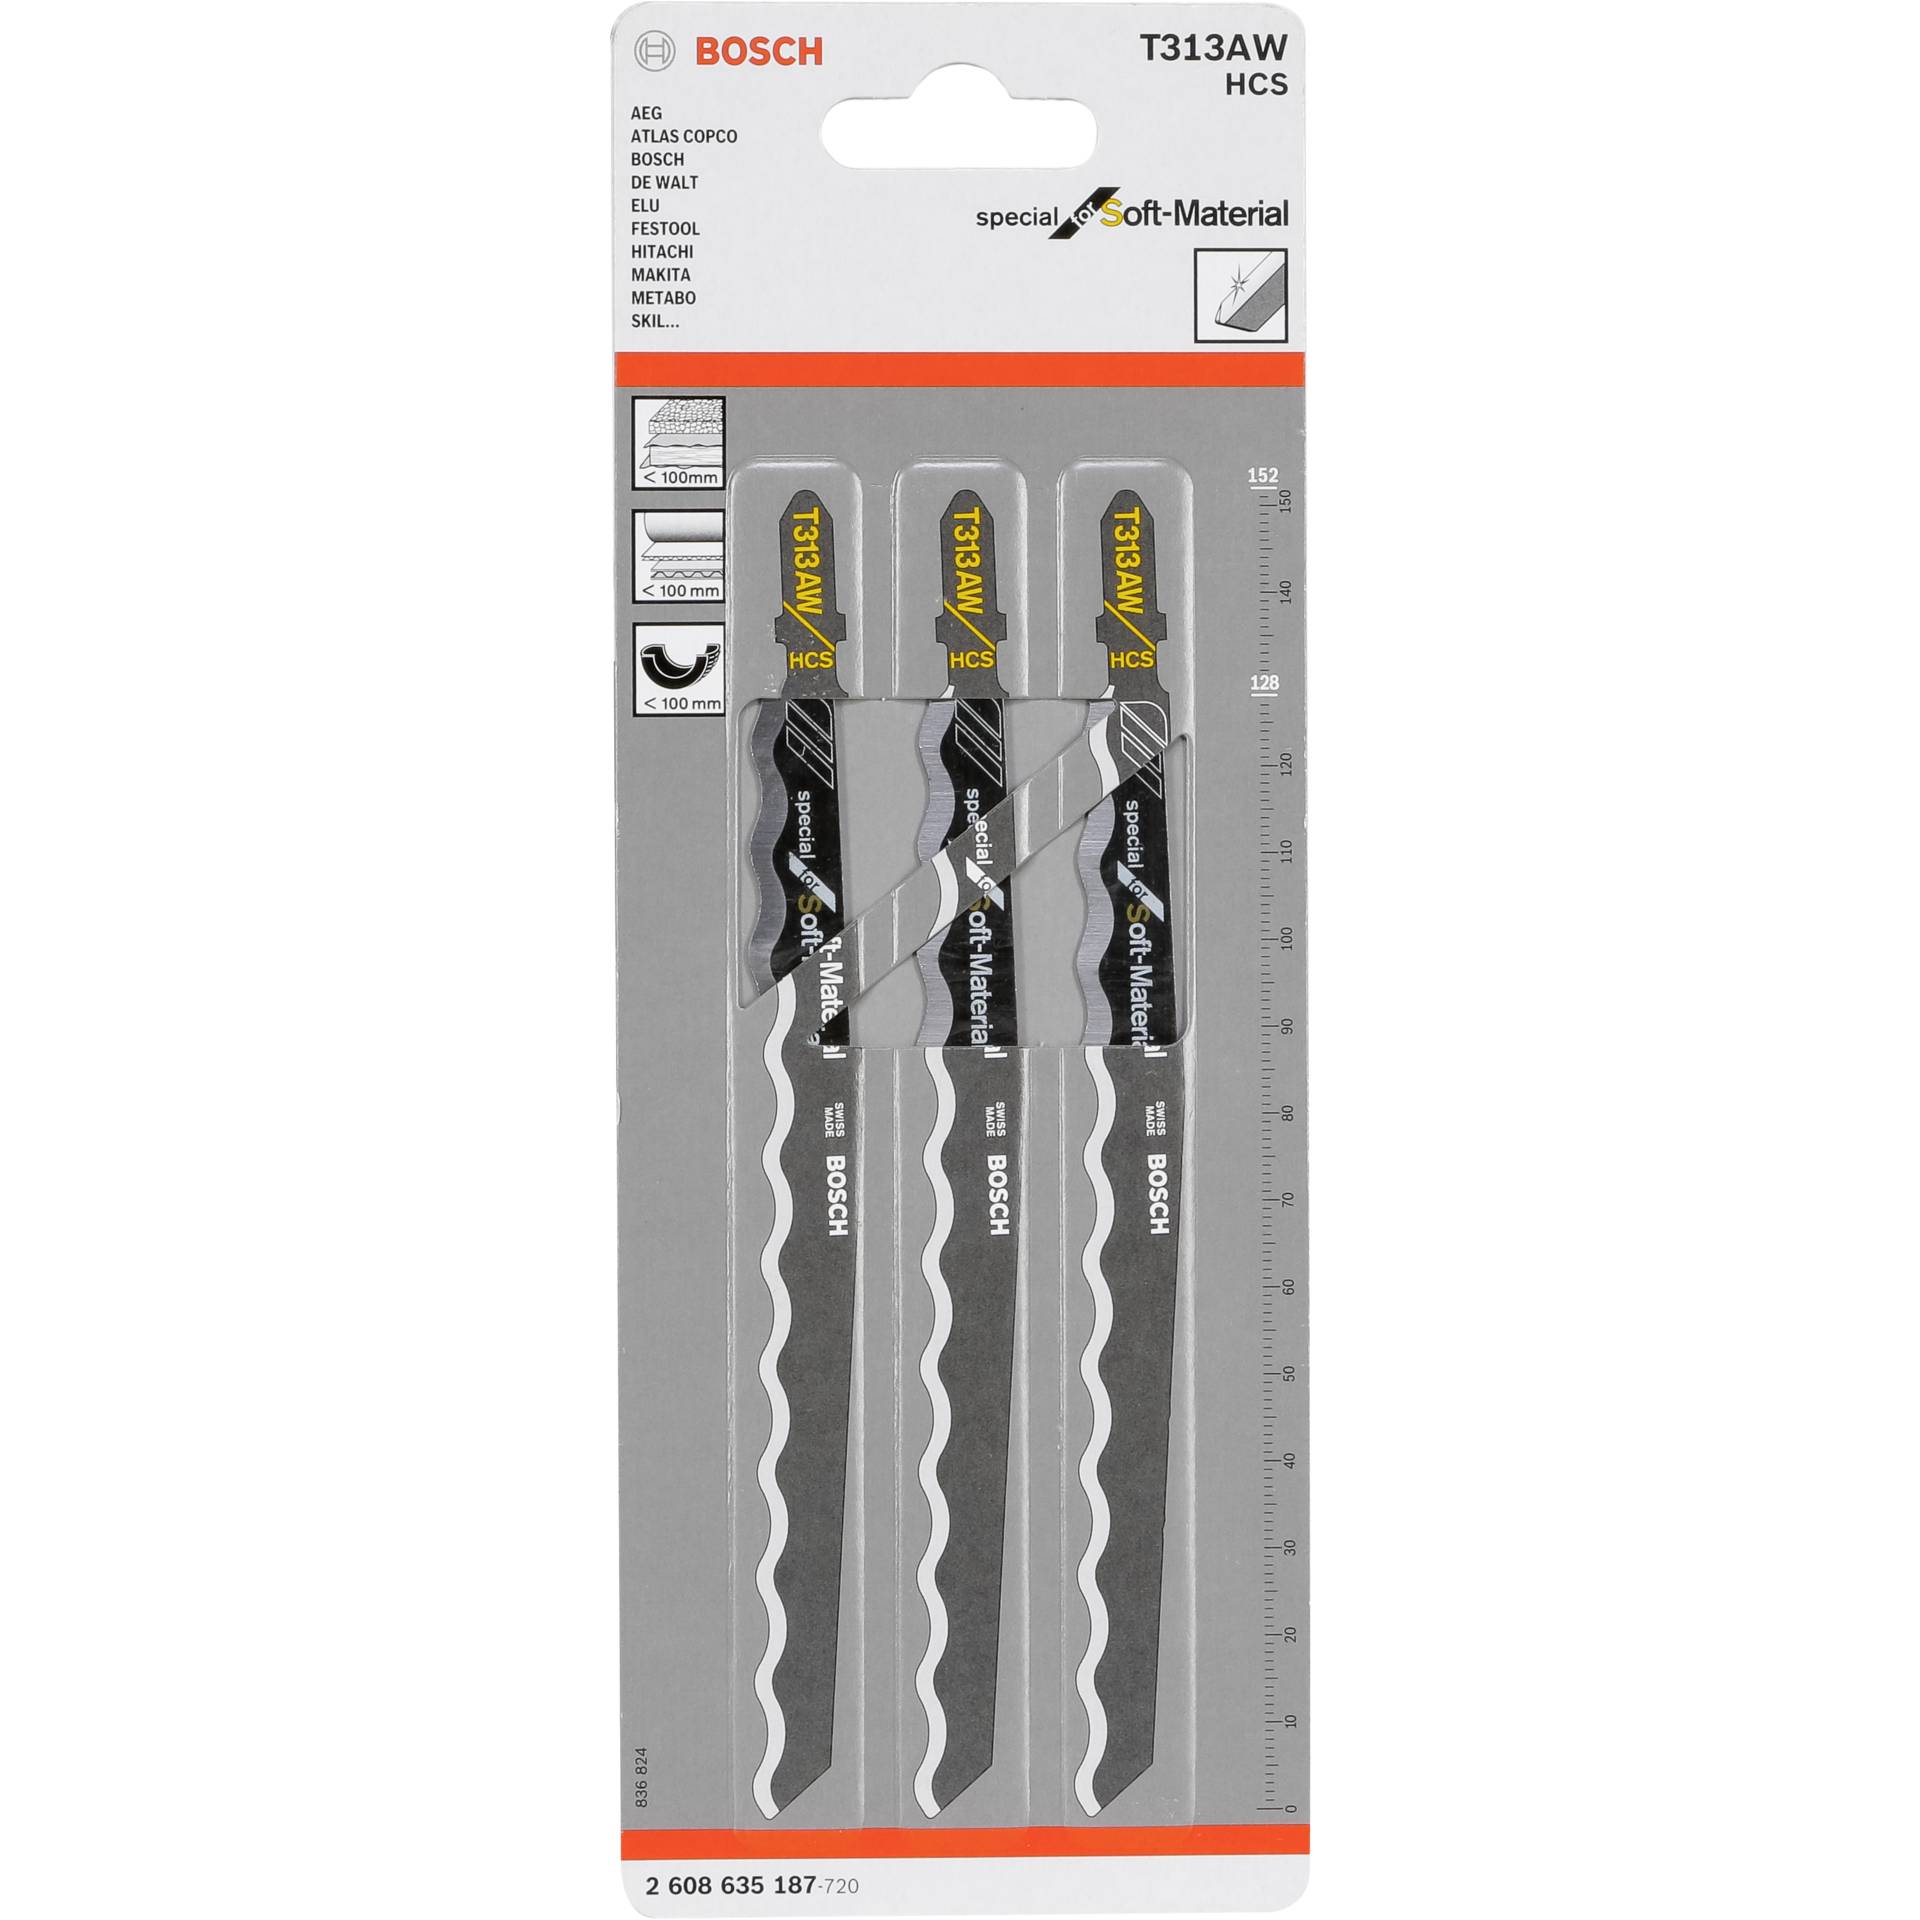 Bosch Jigsaw Blades T 313 AW Special for Soft Material 3 Pack 2608635187 Power Tool Services